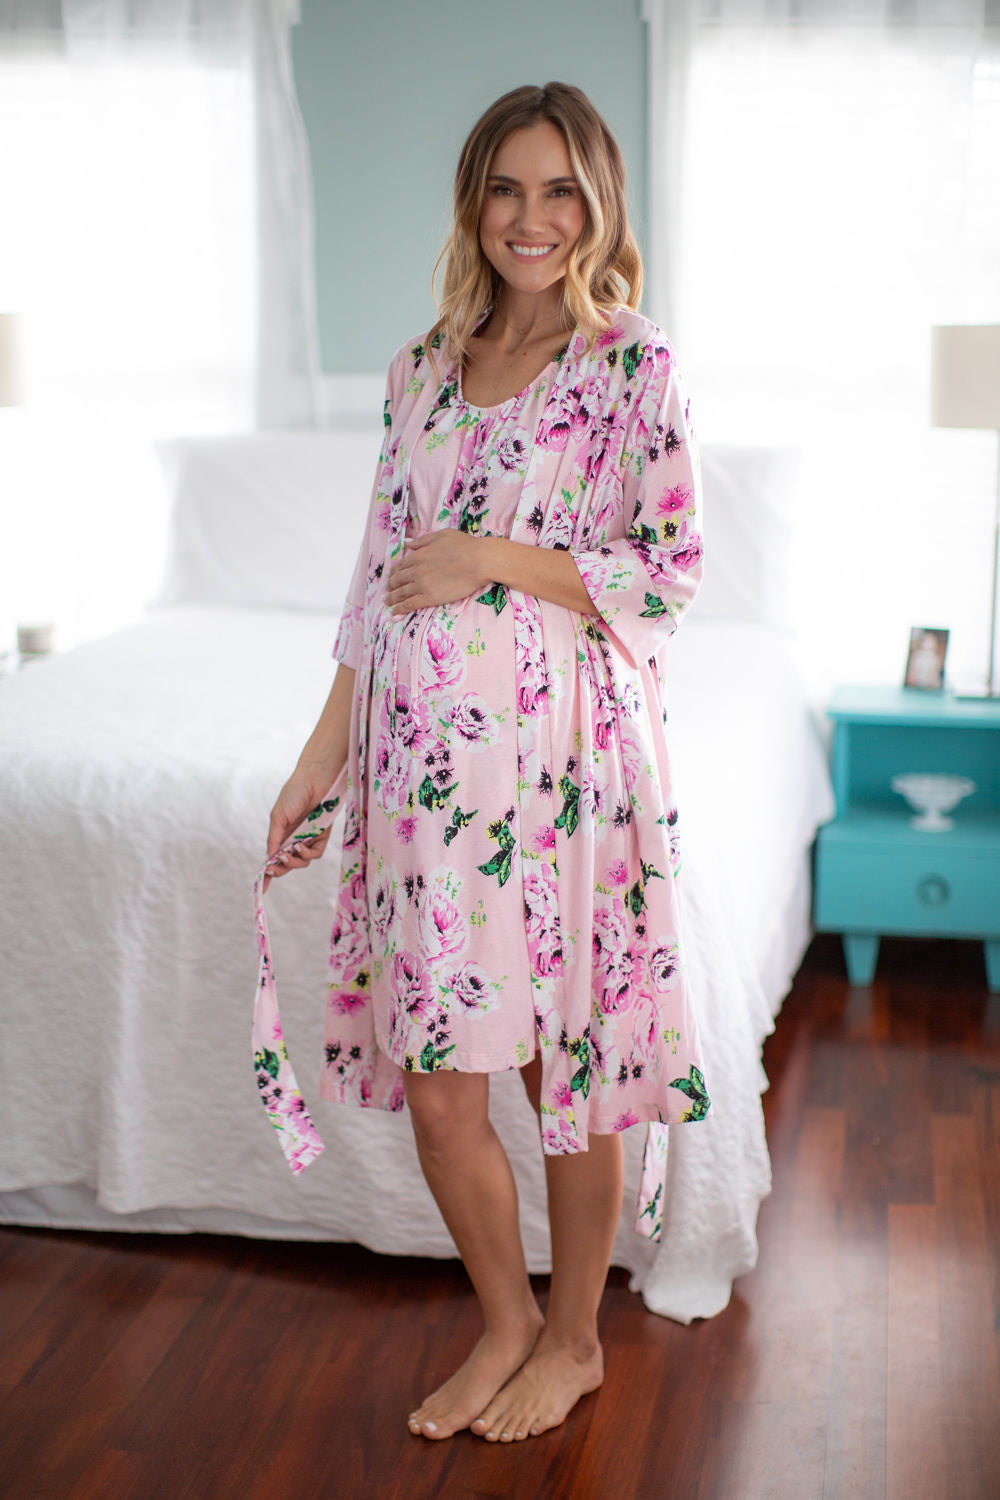 Buy Maternity Hospital Gown, Maternity Robe, Nursing Gown , Labor